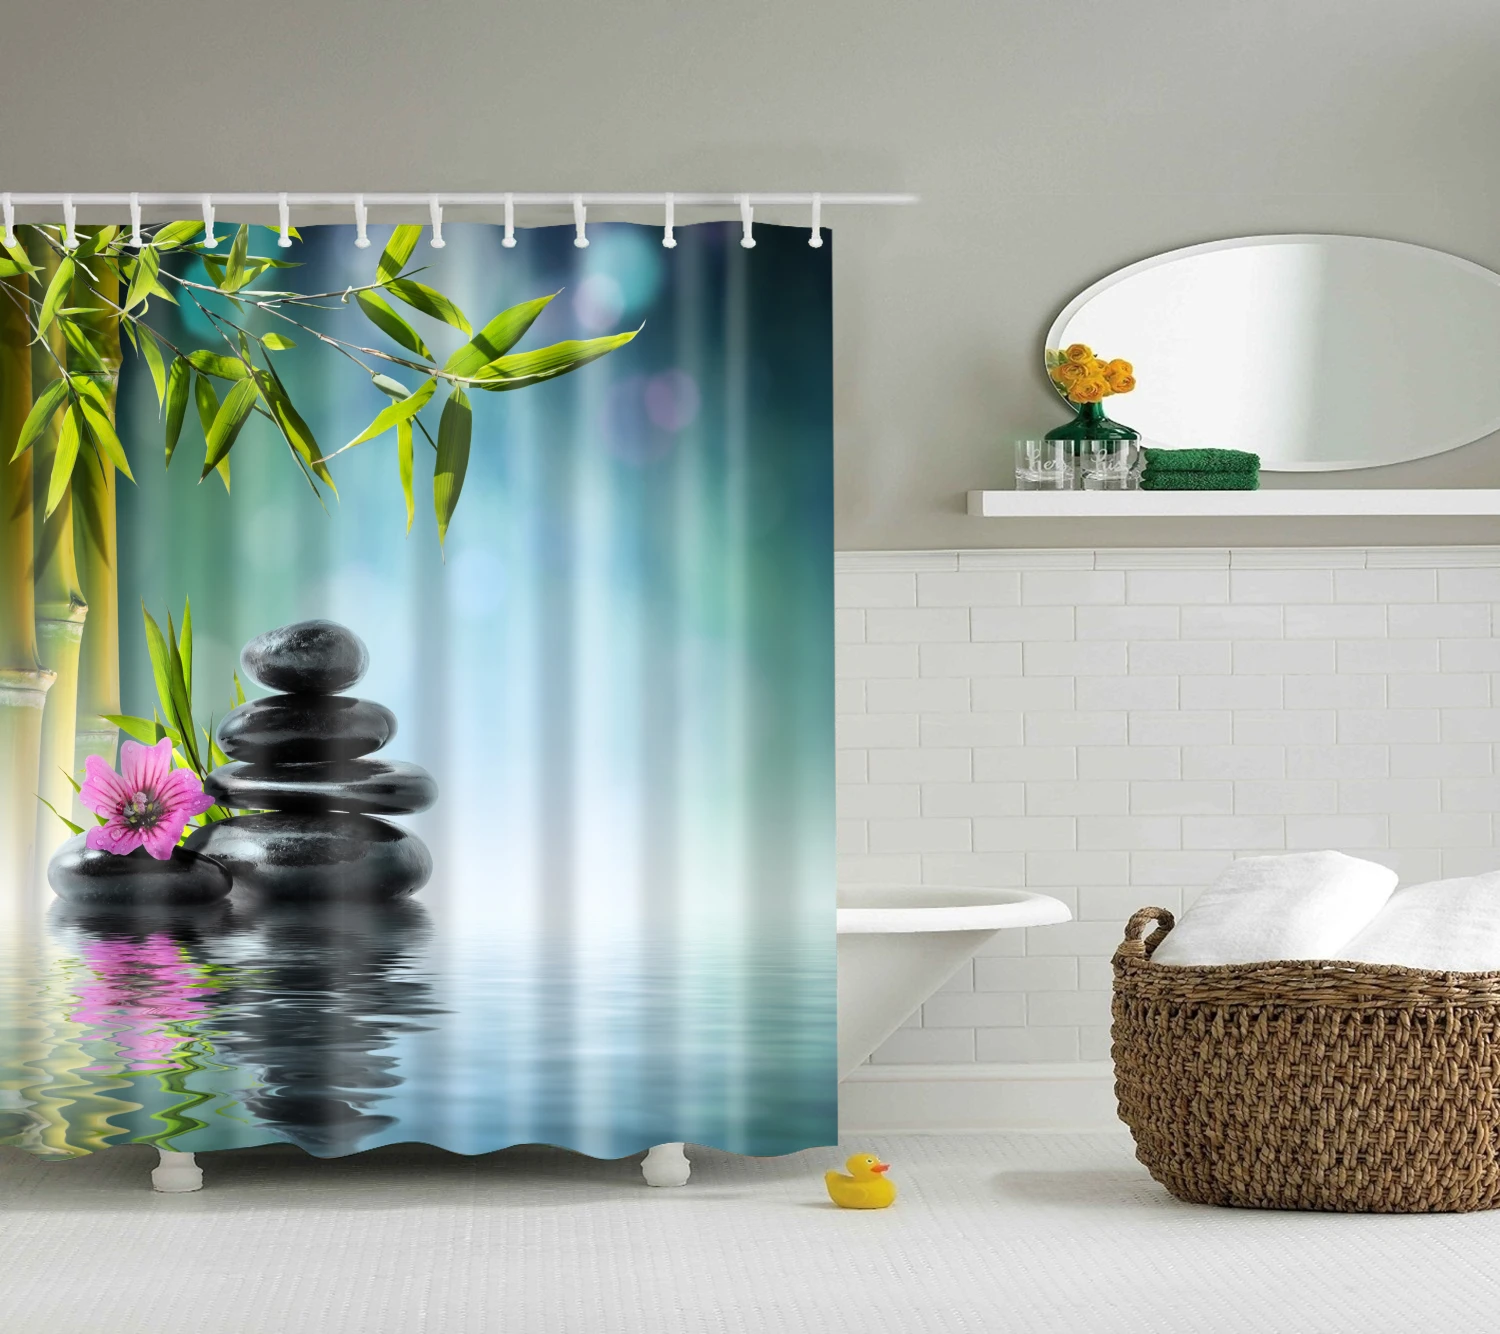 Landscape Print Waterproof Polyester Bathroom Shower Curtain With Free 12 Hooks 